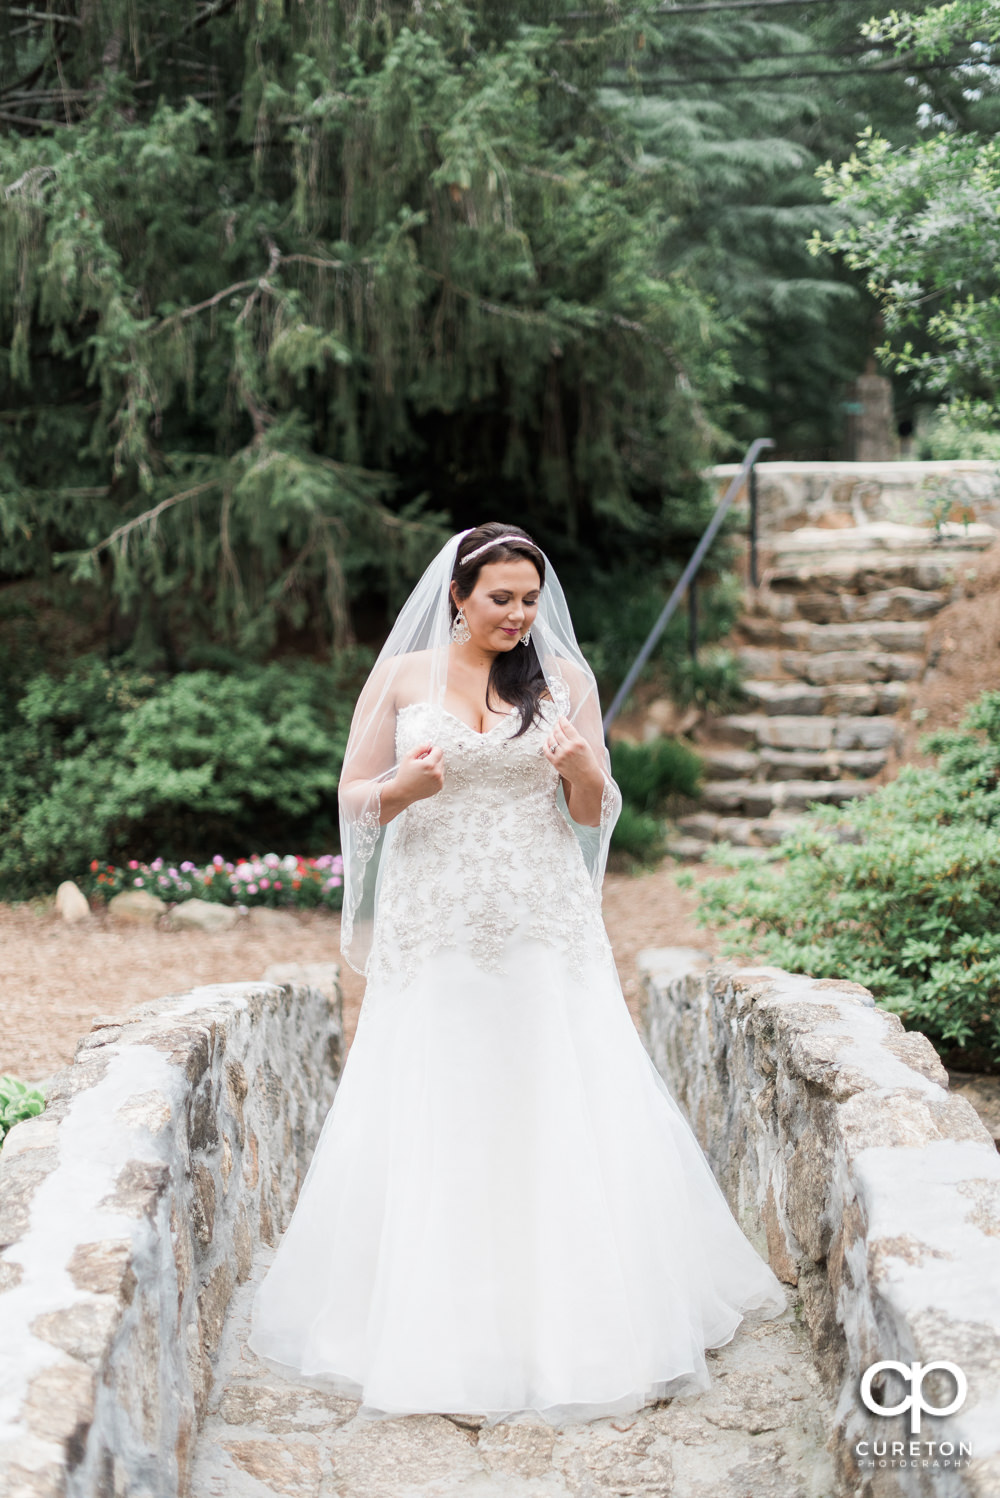 Bride holding her veil on the stone bridge at the rock quarry in Greenville.